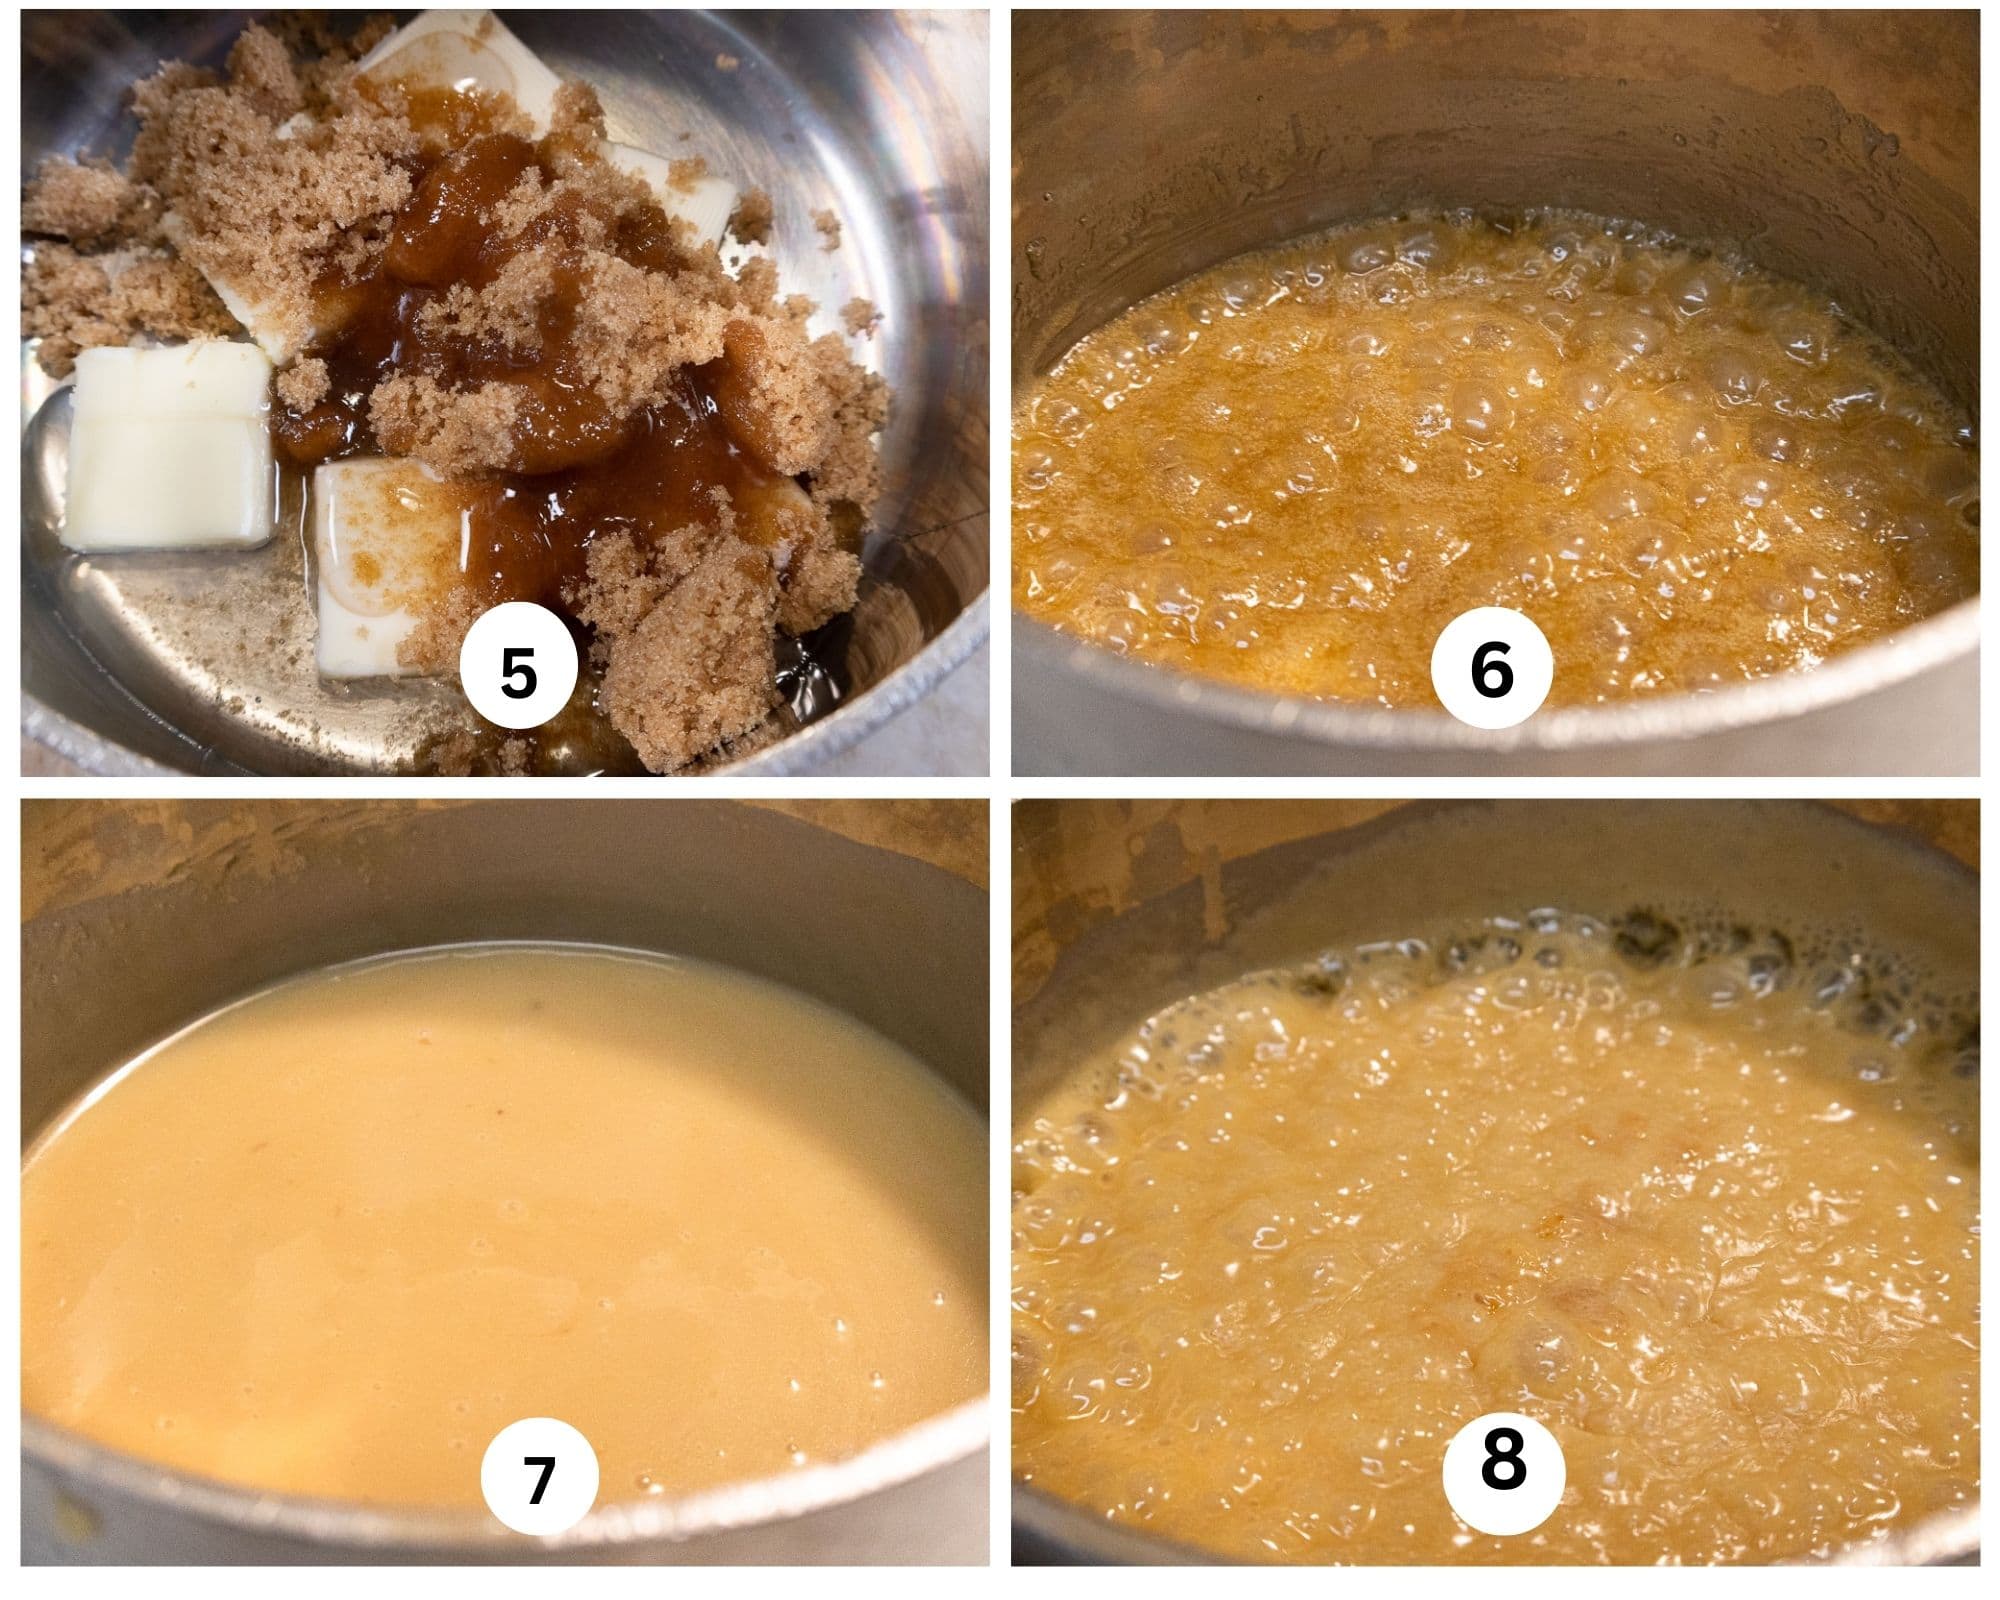 This collage show how to make the toffee by putting the butter, brown sugar, cornsyrup in a heavy pan and bringing it to a boil, add the condensed milk and boil it for 2 minutes.